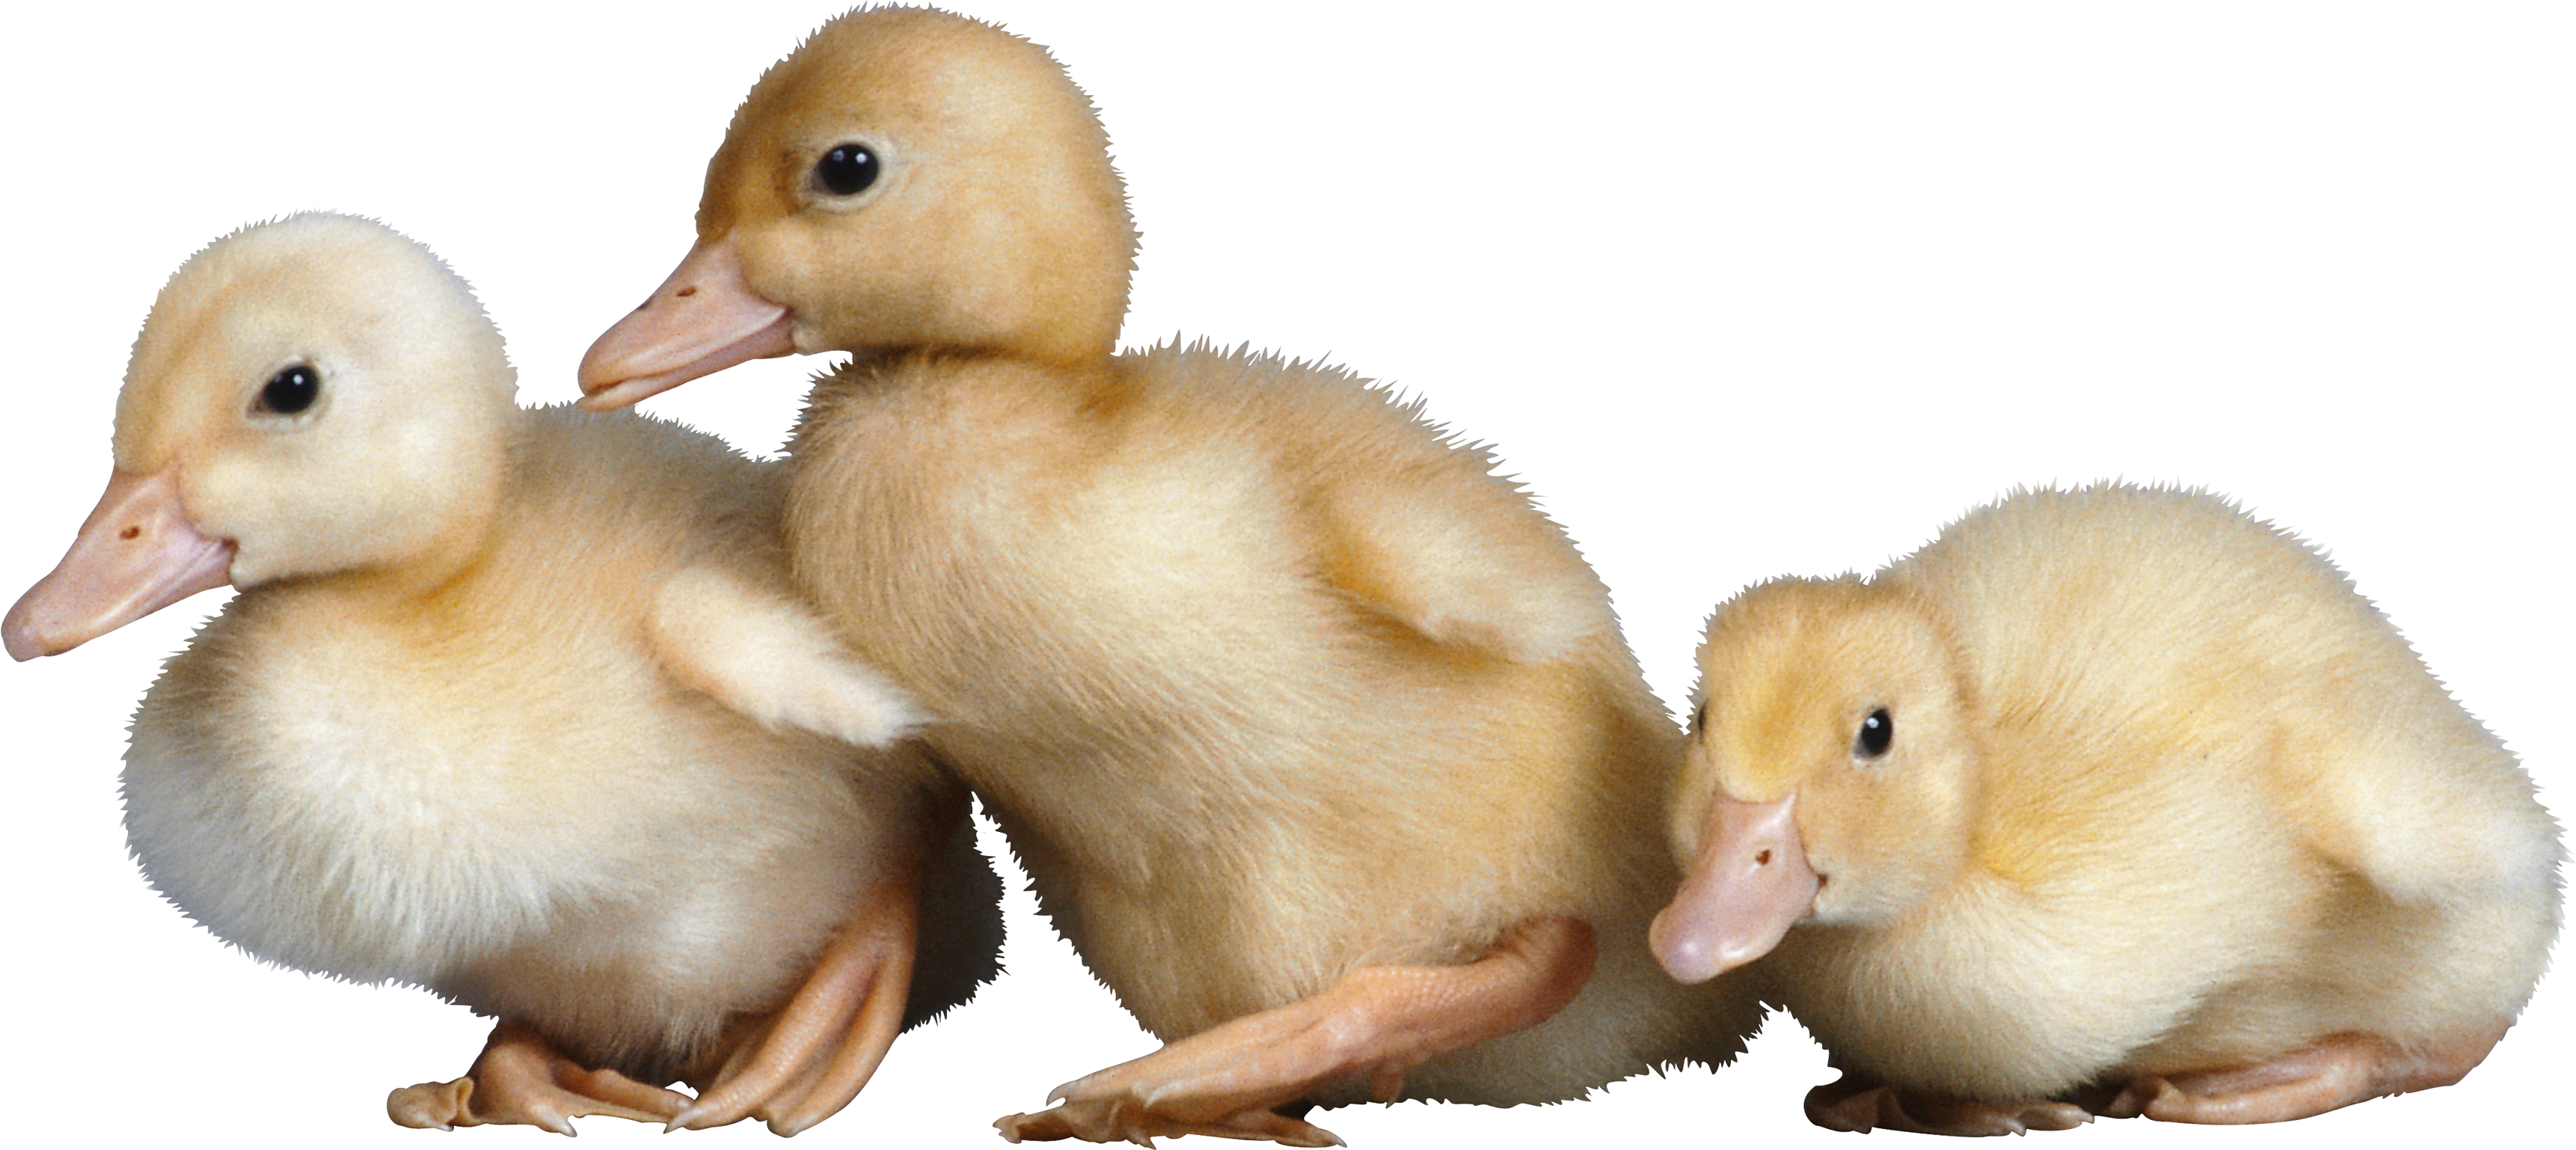 Duck Png Image - Duck, Transparent background PNG HD thumbnail